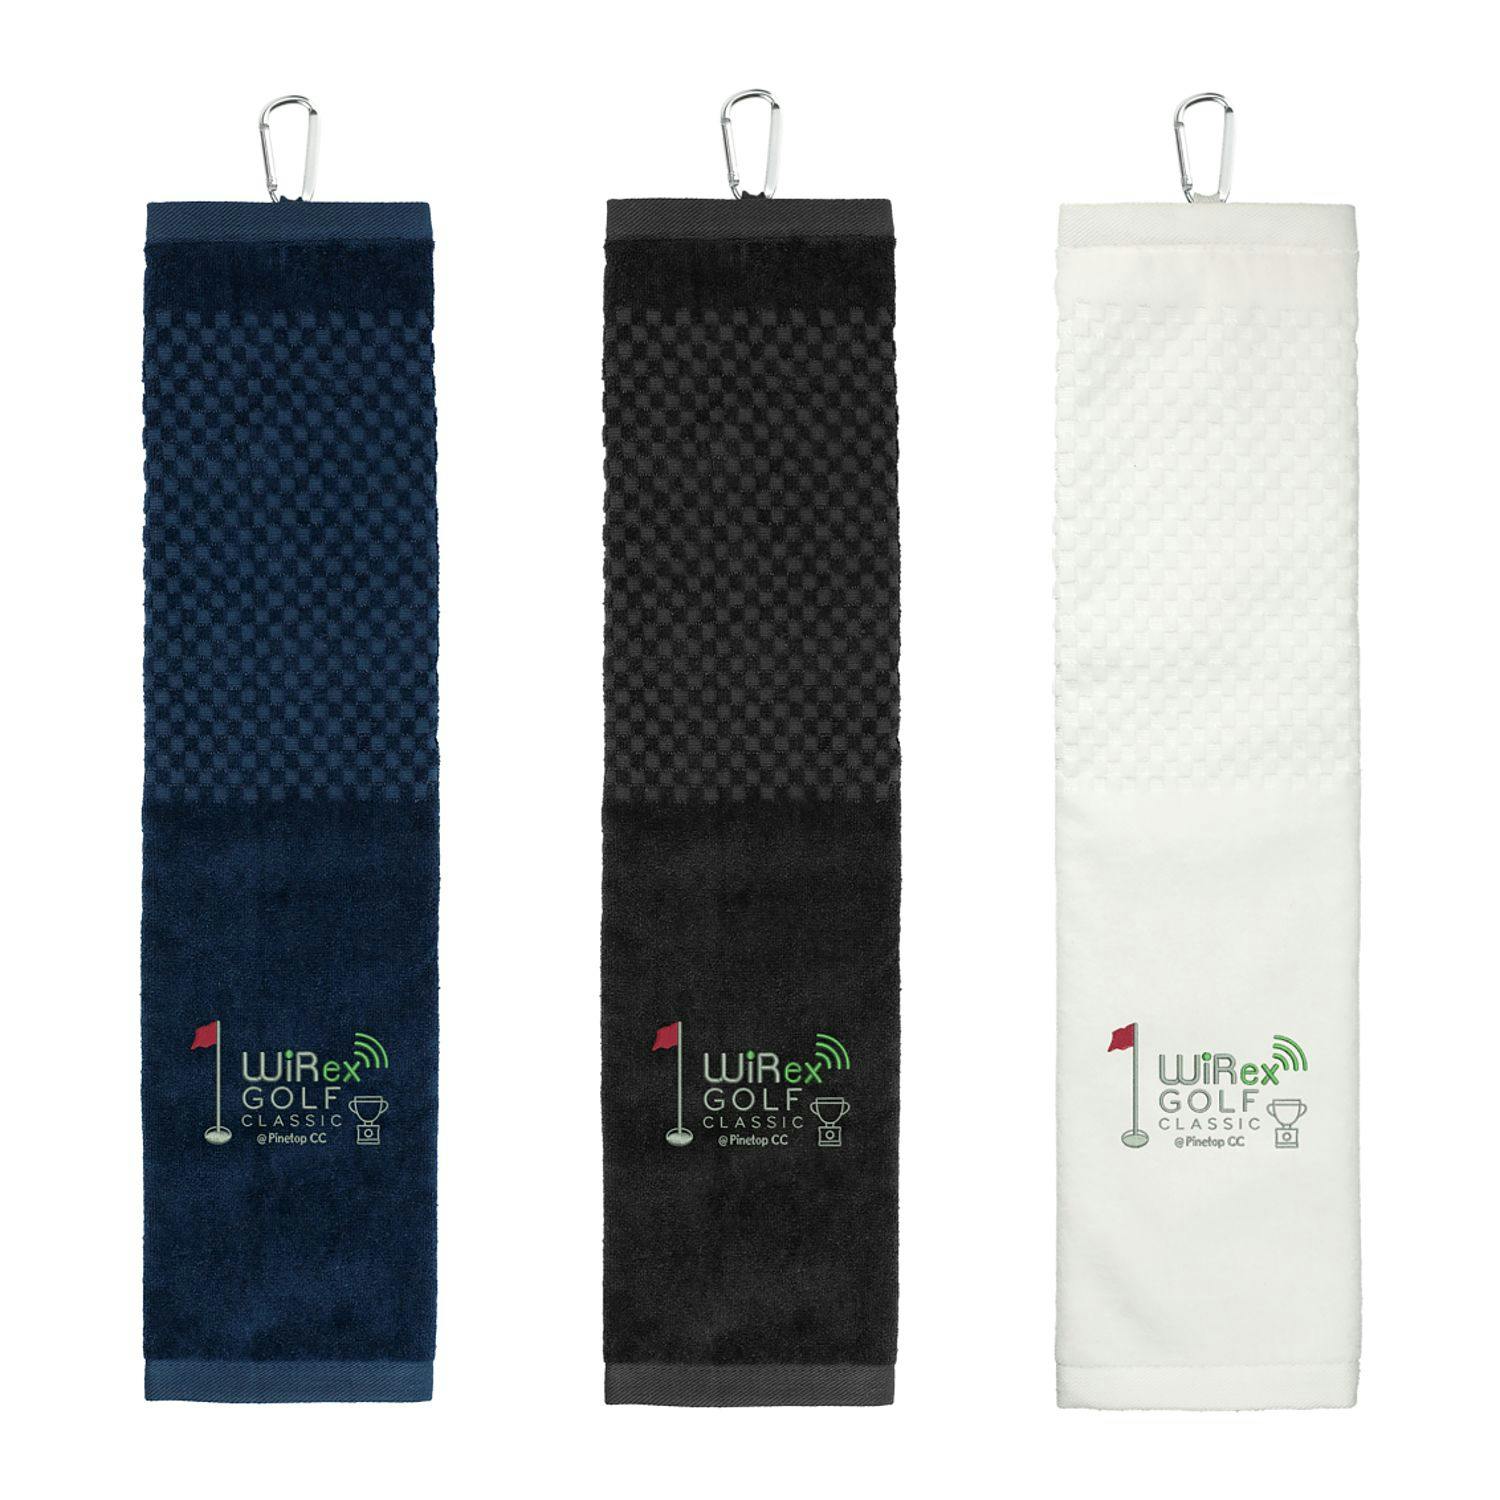 3.5lb./doz. 5.25x22in Scrubber Golf Towel - additional Image 2